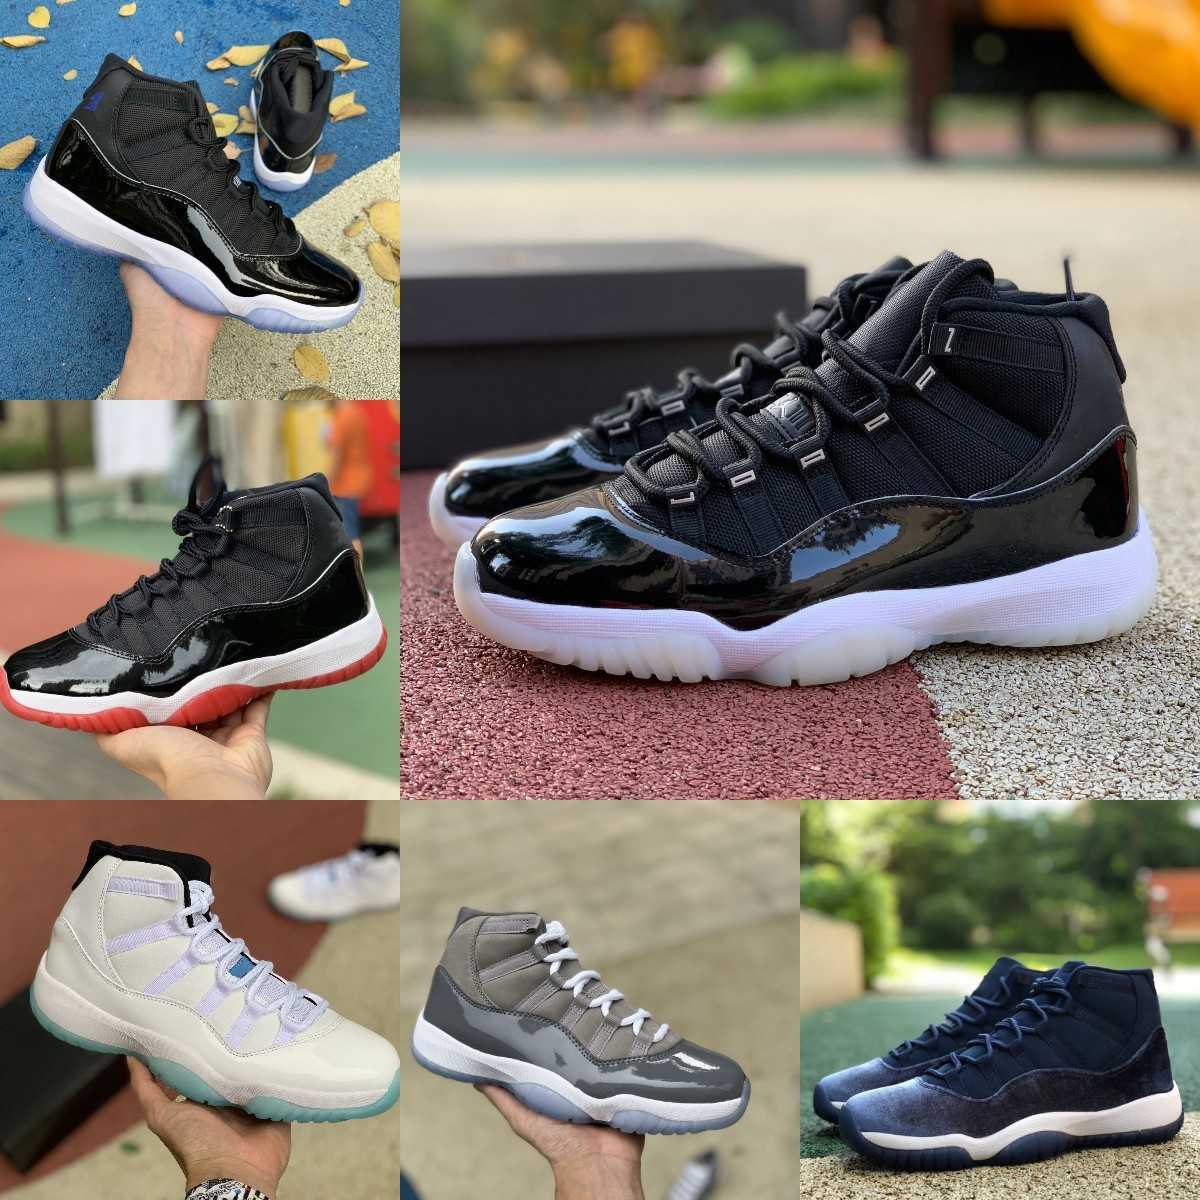 

Jumpman Jubilee 11 11s High Basketball Shoes COOL GREY Legend Blue Midnight Navy Playoffs Bred Space Jam Gamma Blue Easter Concord 45 Low Columbia Trainer Sneakers S9, Please contact us